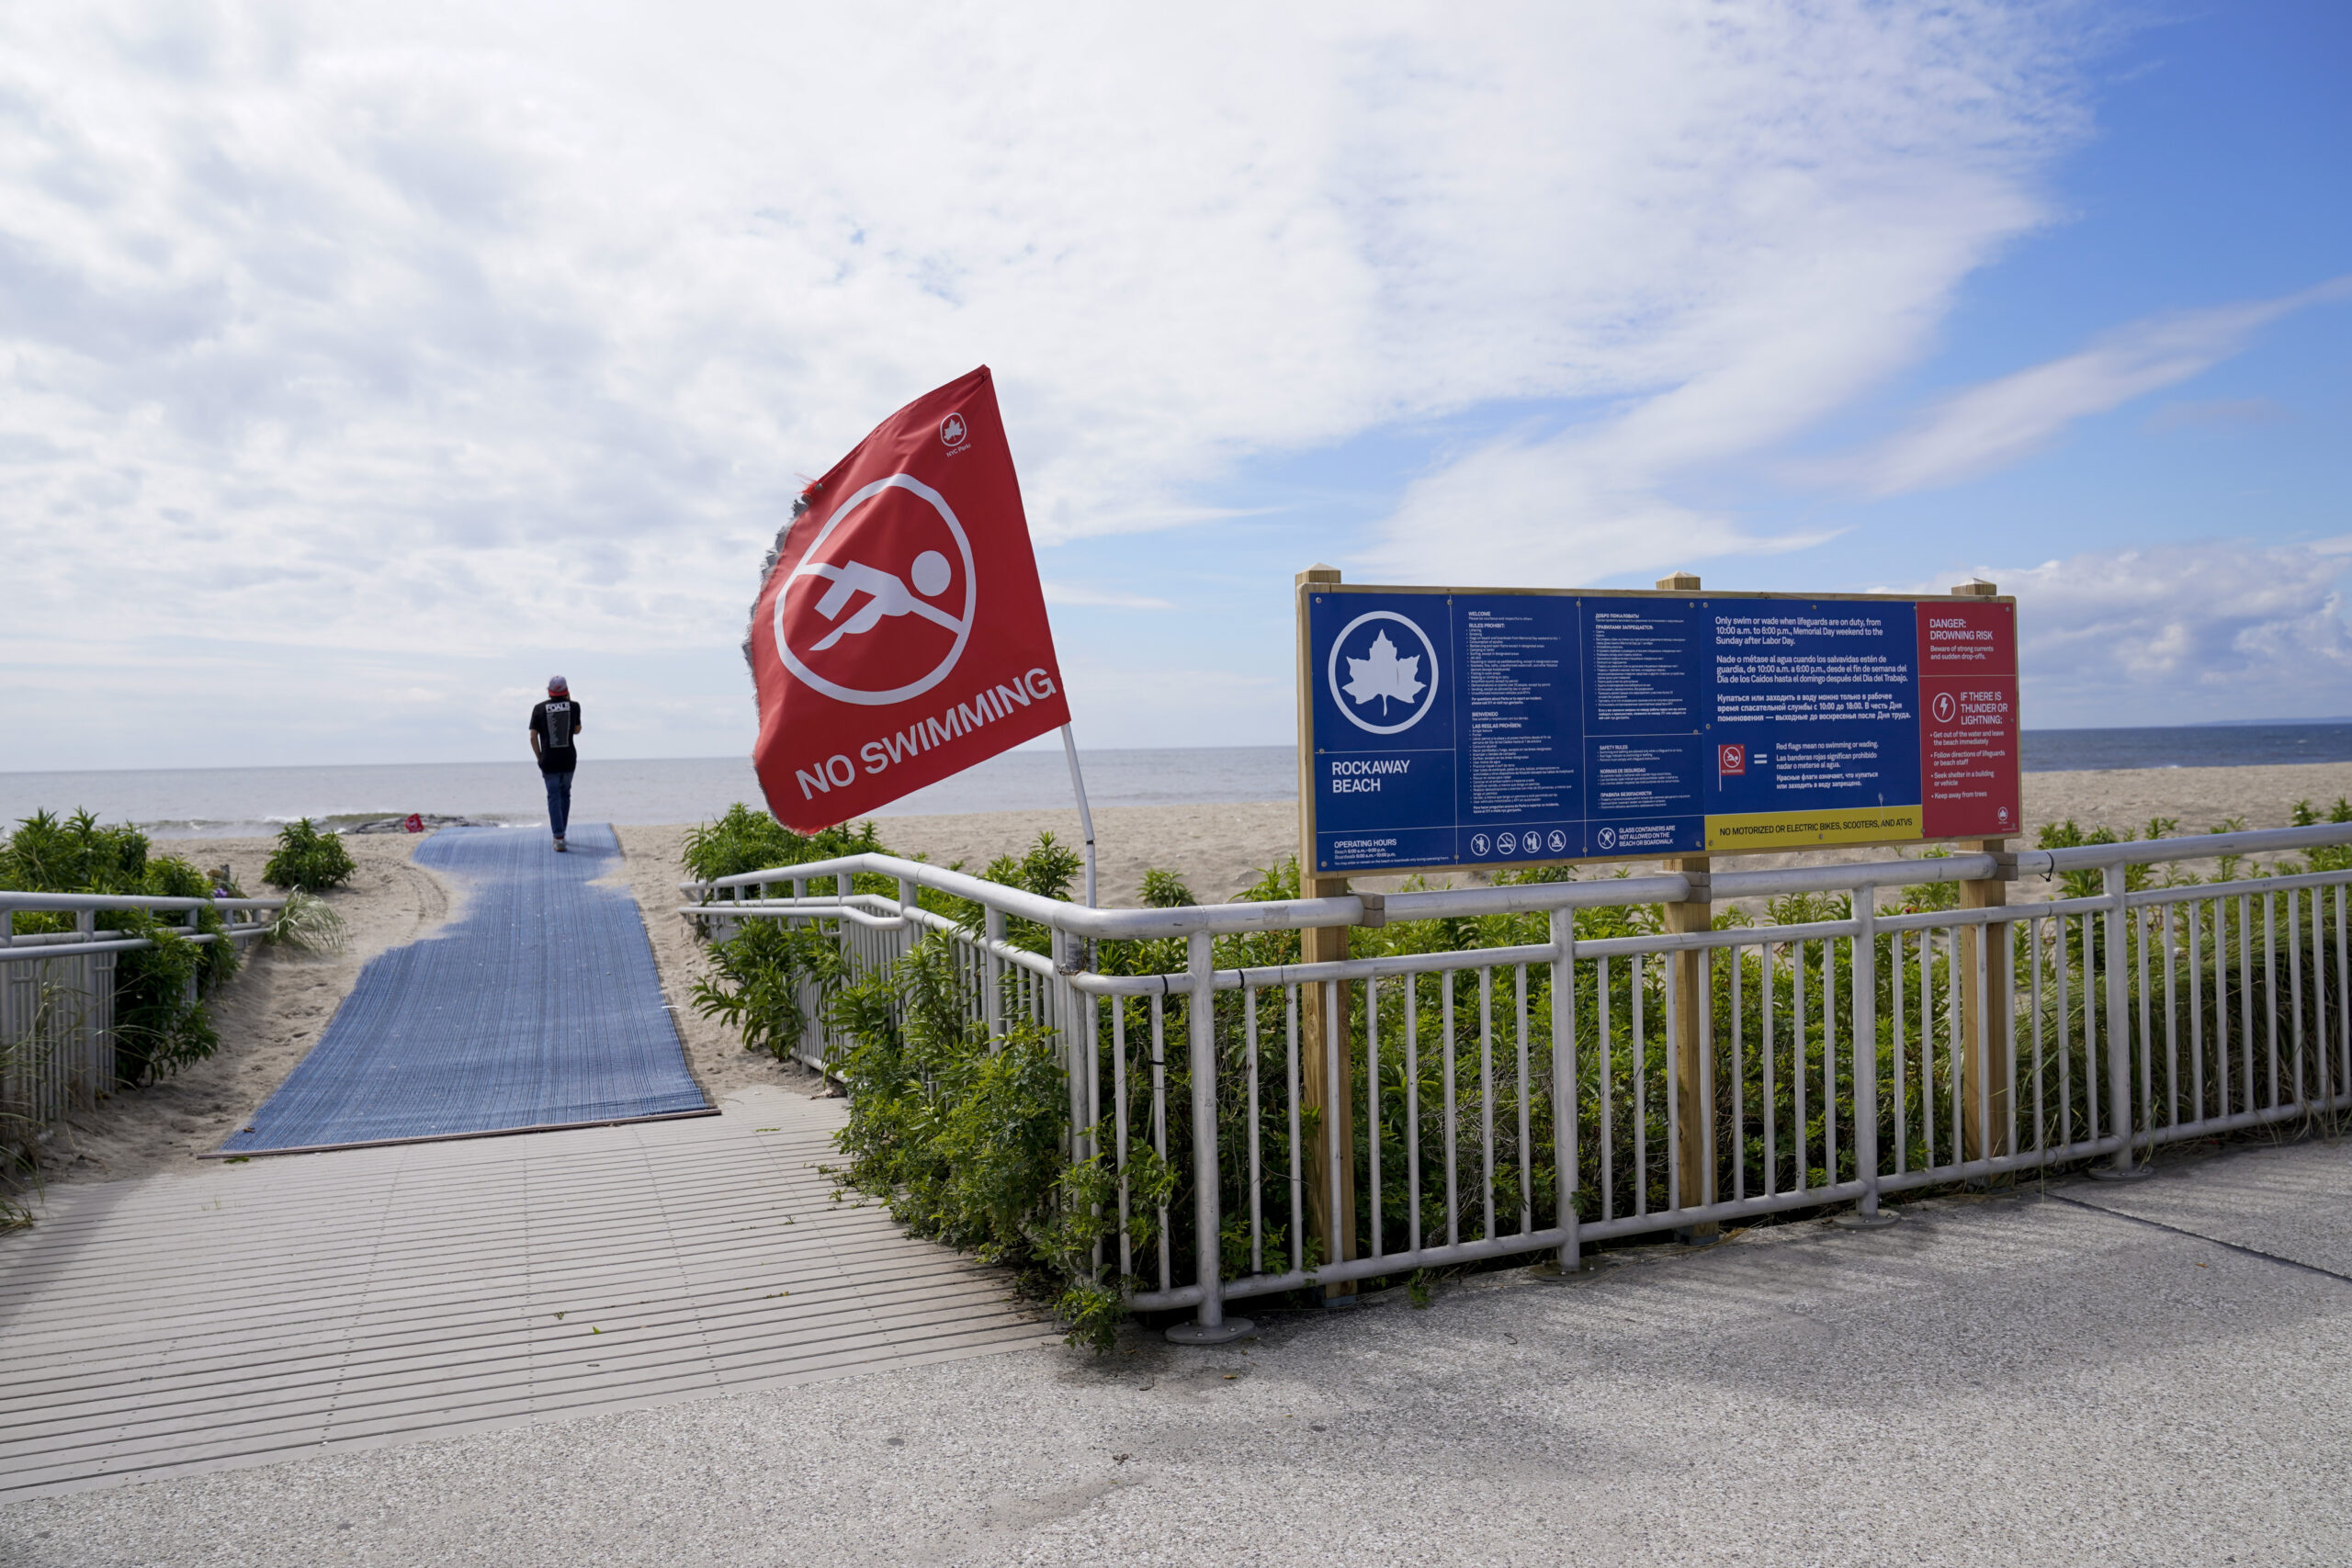 A red flag warning visitors swimming is prohibited is seen at the entrance to Rockaway beach, Tuesd...